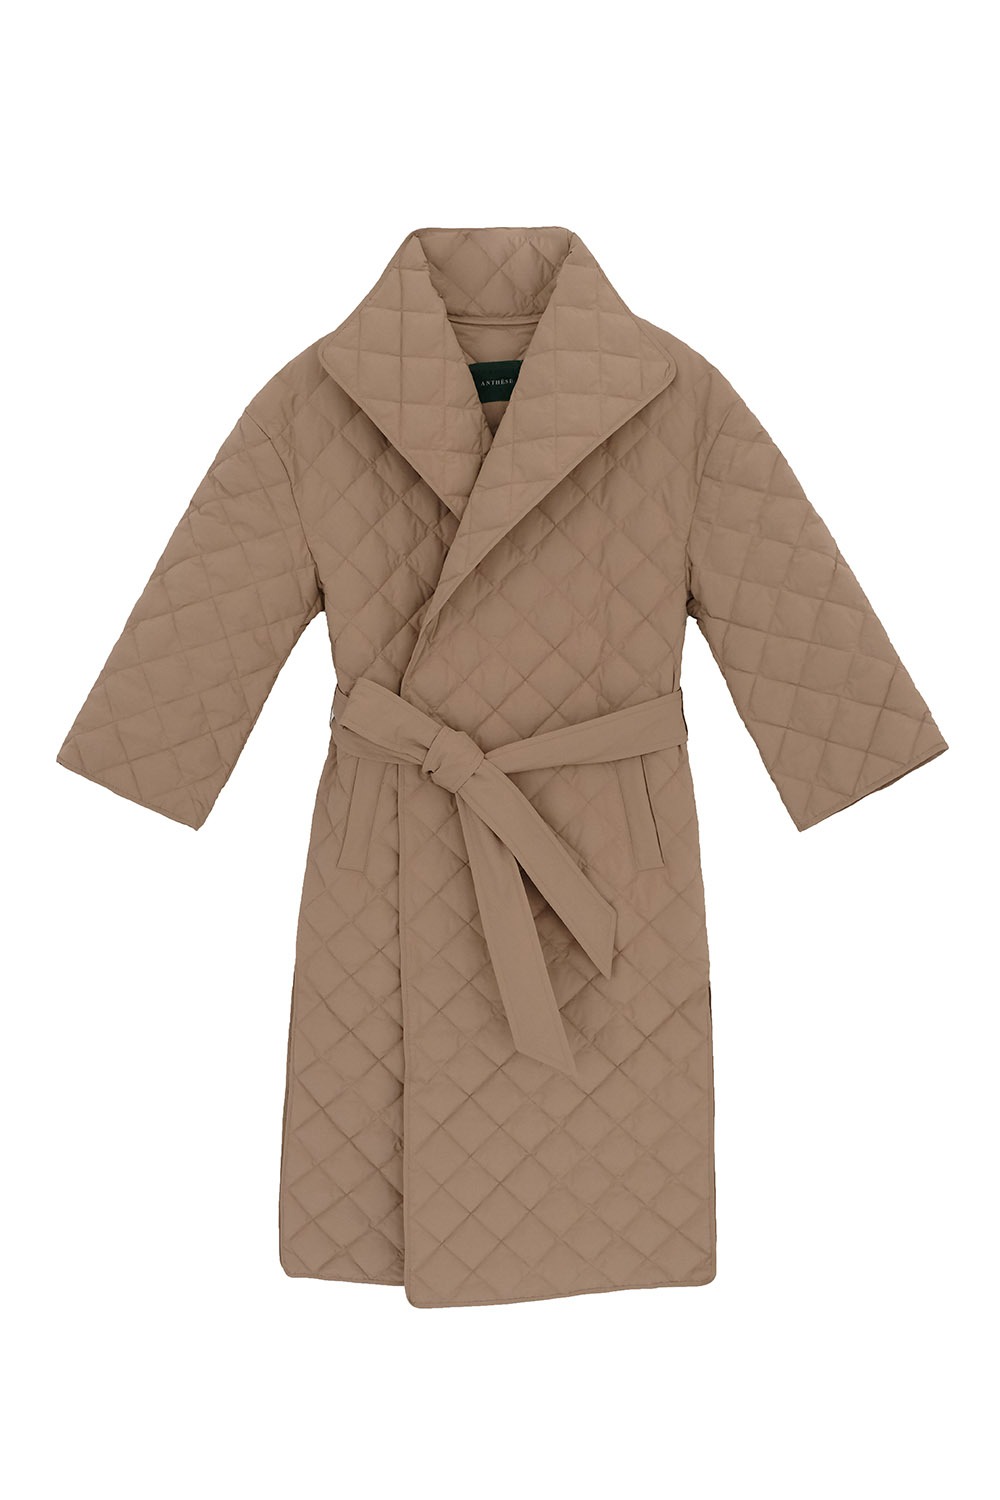 ANTHÈSE goose down quilting padding coat, neutral beige